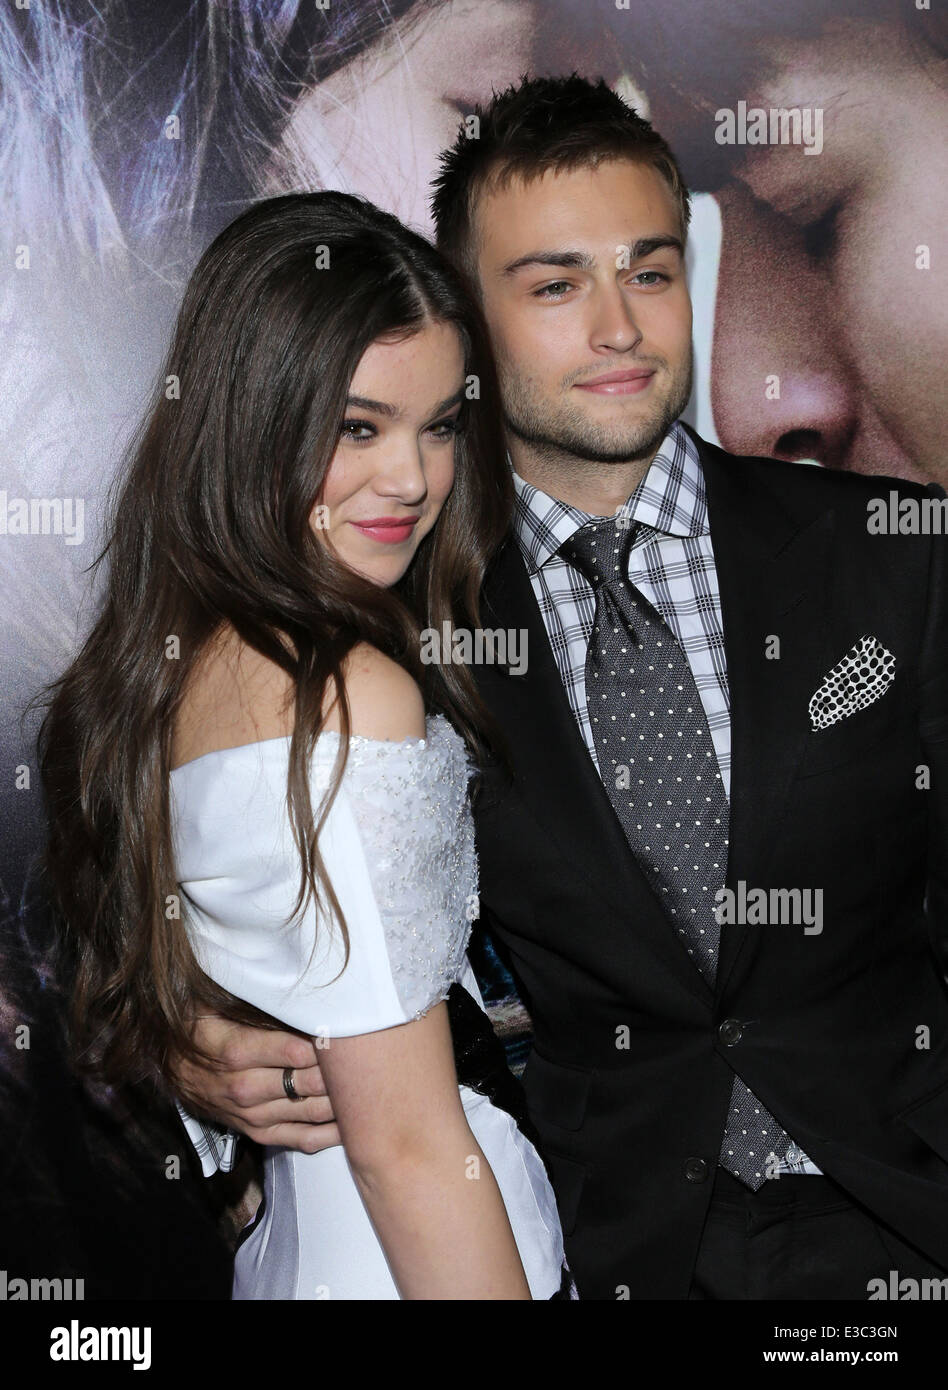 Premiere Of Relativity Media's 'Romeo and Juliet' Held at ArcLight Cinemas  Featuring: Hailee Steinfeld,Douglas Booth Where: Hollywood, California, United States When: 25 Sep 2013 Stock Photo